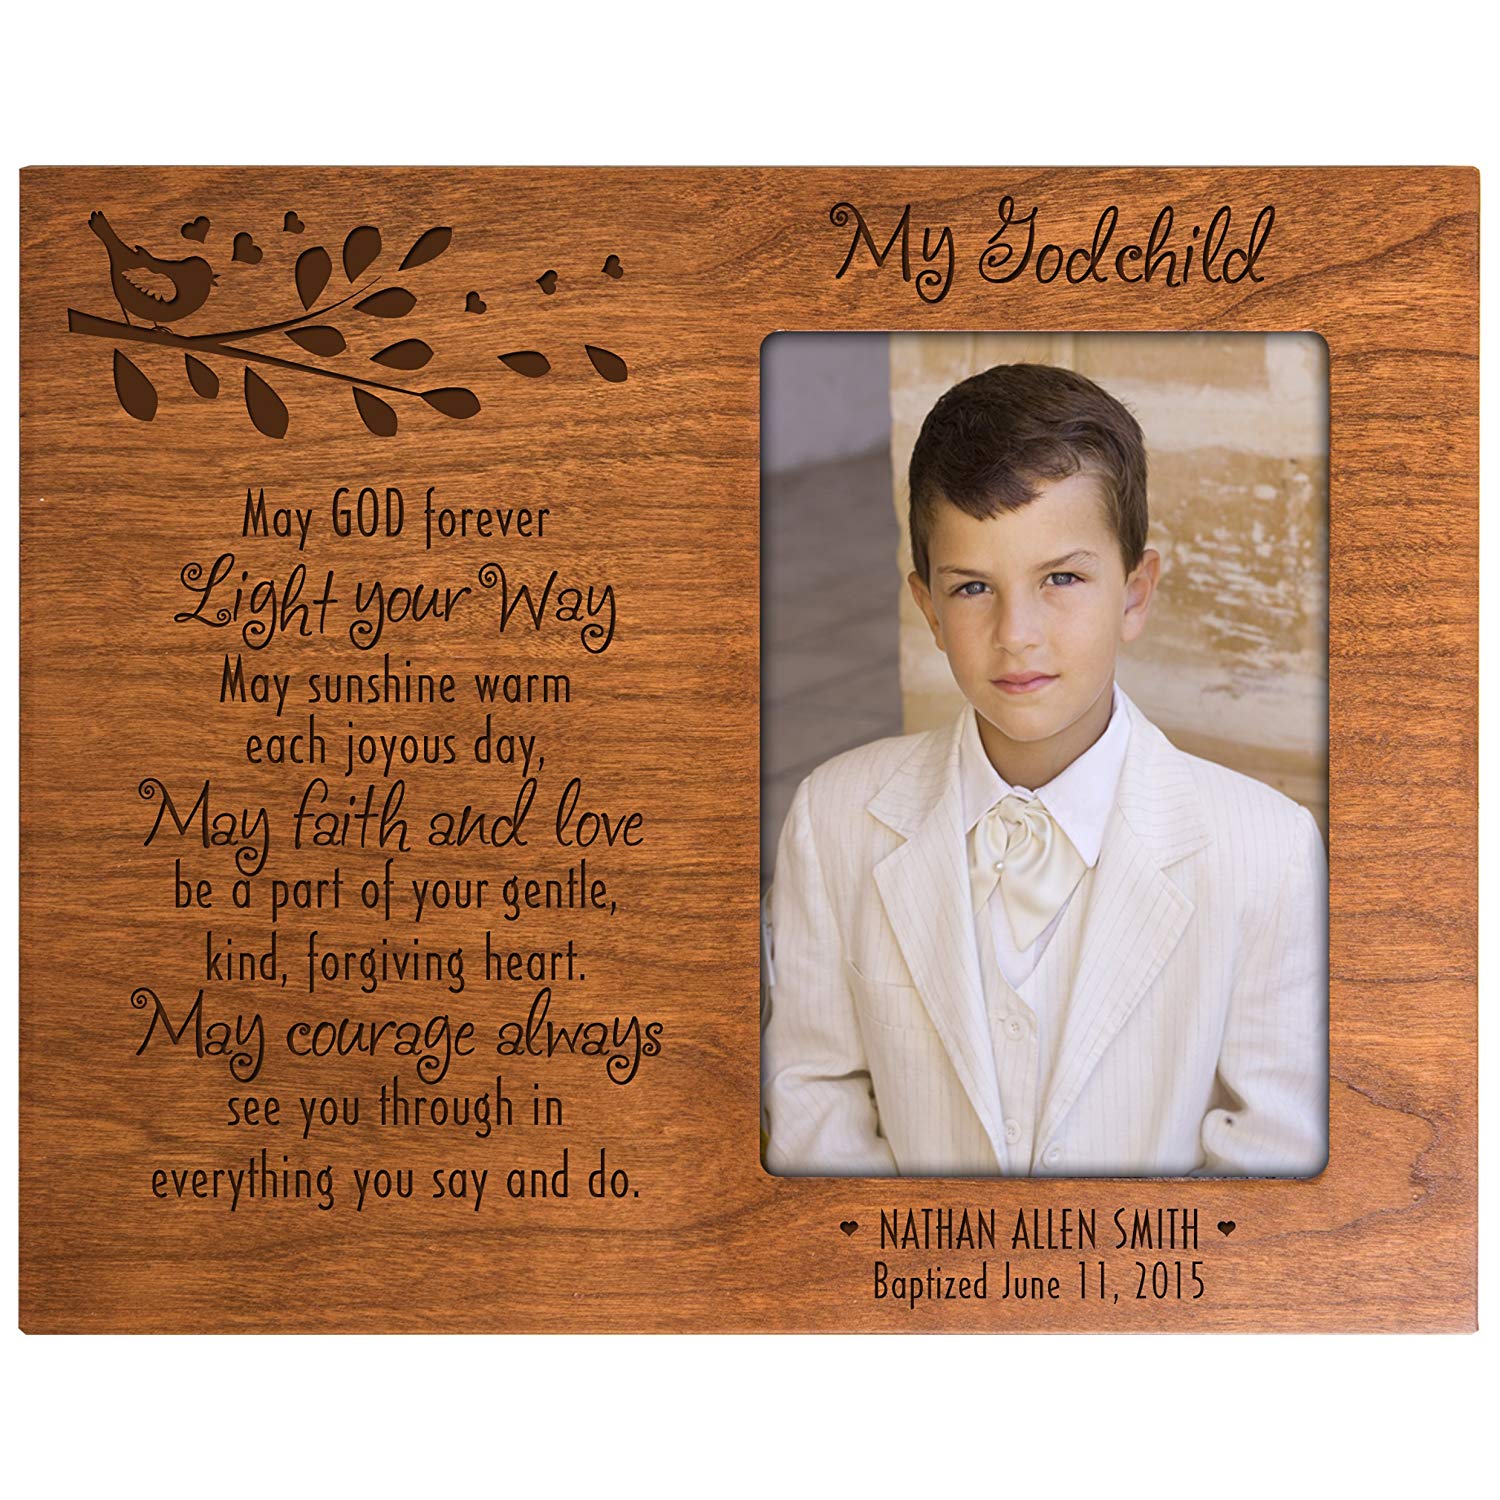 Personalized Baptism Photo Frame Gift "Light Your Way" - LifeSong Milestones